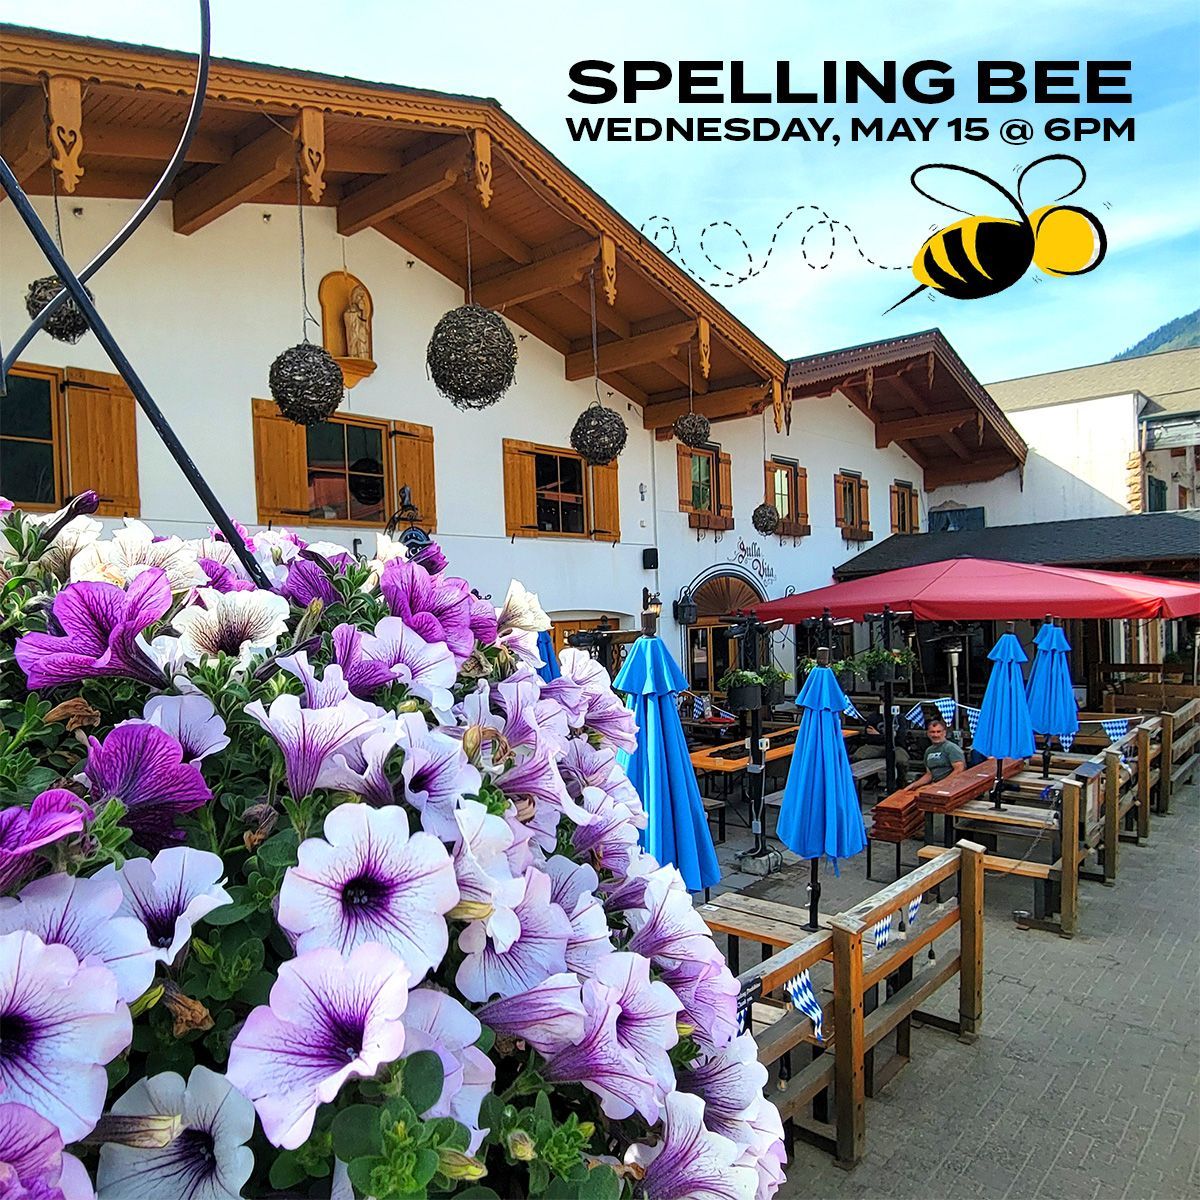 Spelling Bee tonight at 6pm at our taproom! To participate, sign up here: buff.ly/3wBppJL , or in person before 6pm. Gift cards for the winners and fun times for all!